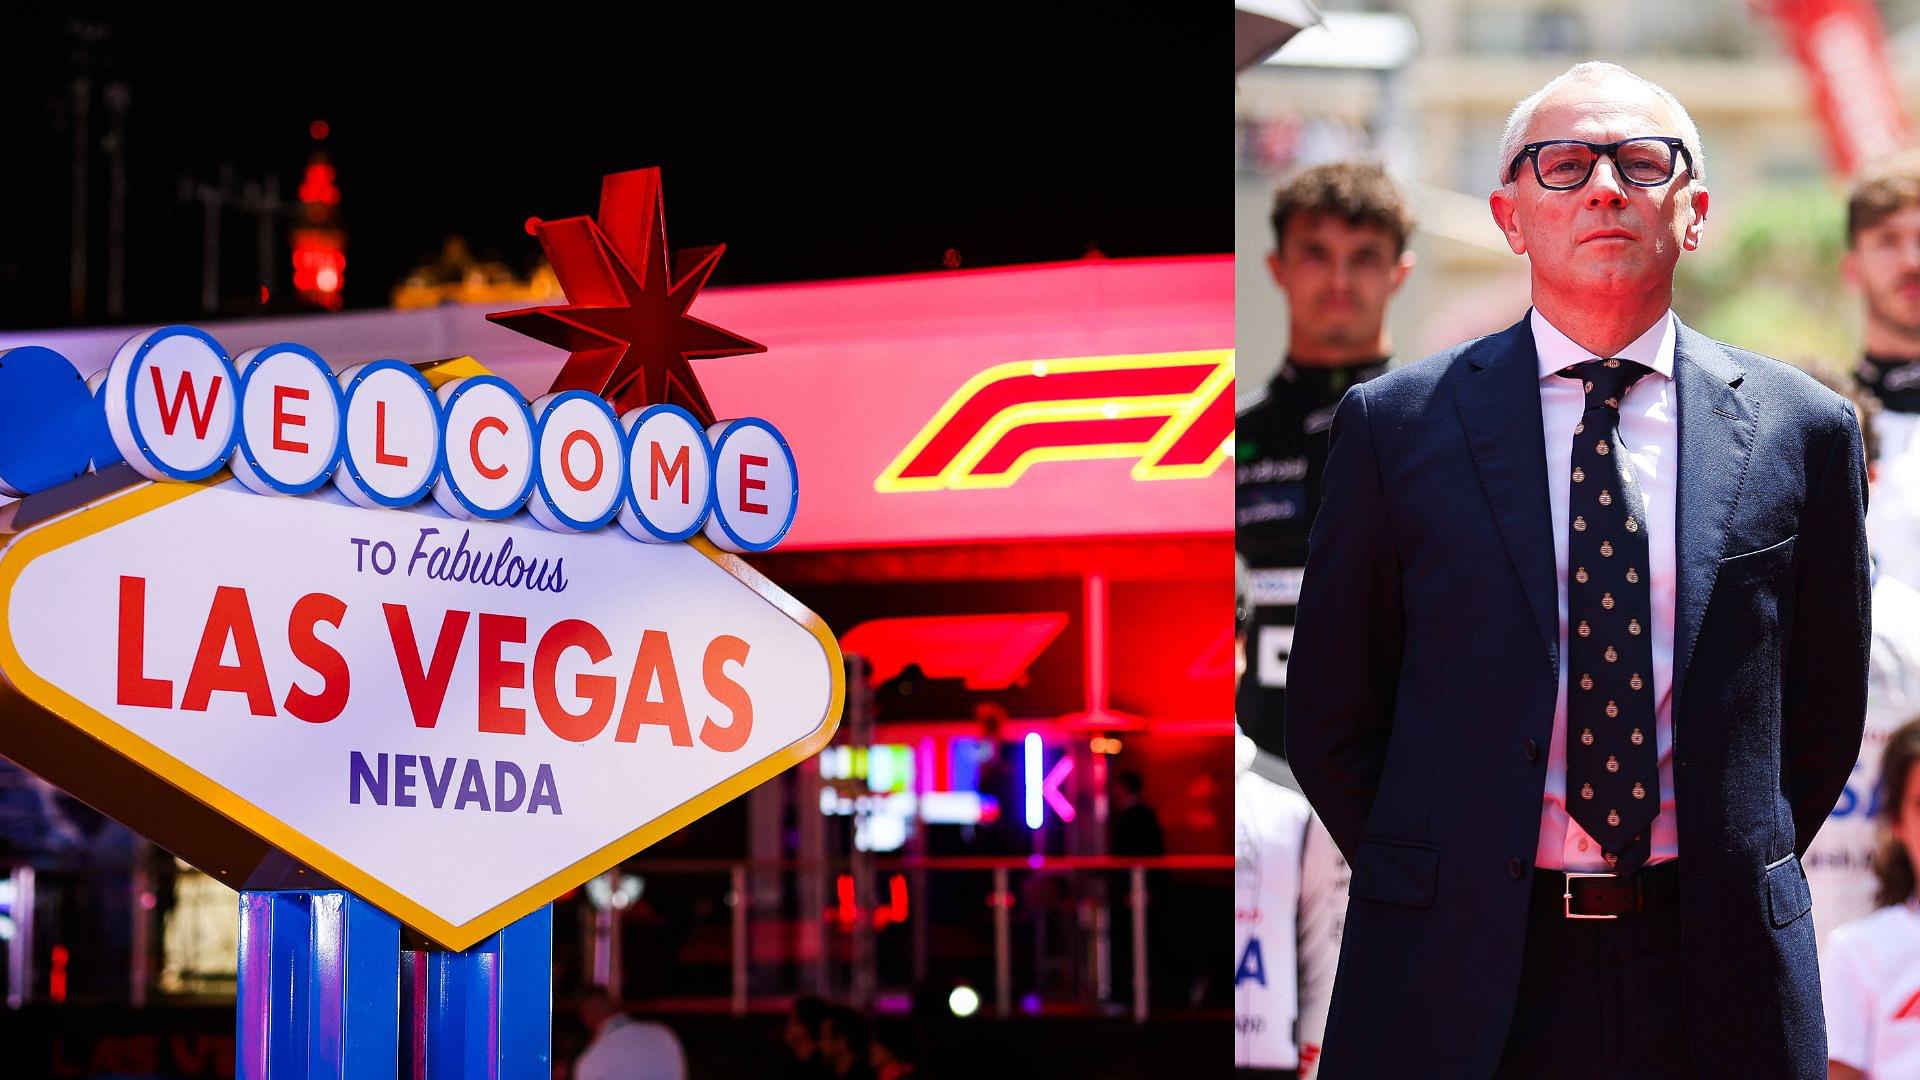 Miami and Las Vegas GP Has Gained Greater Economic Impact Than Super Bowl, Claims F1 CEO